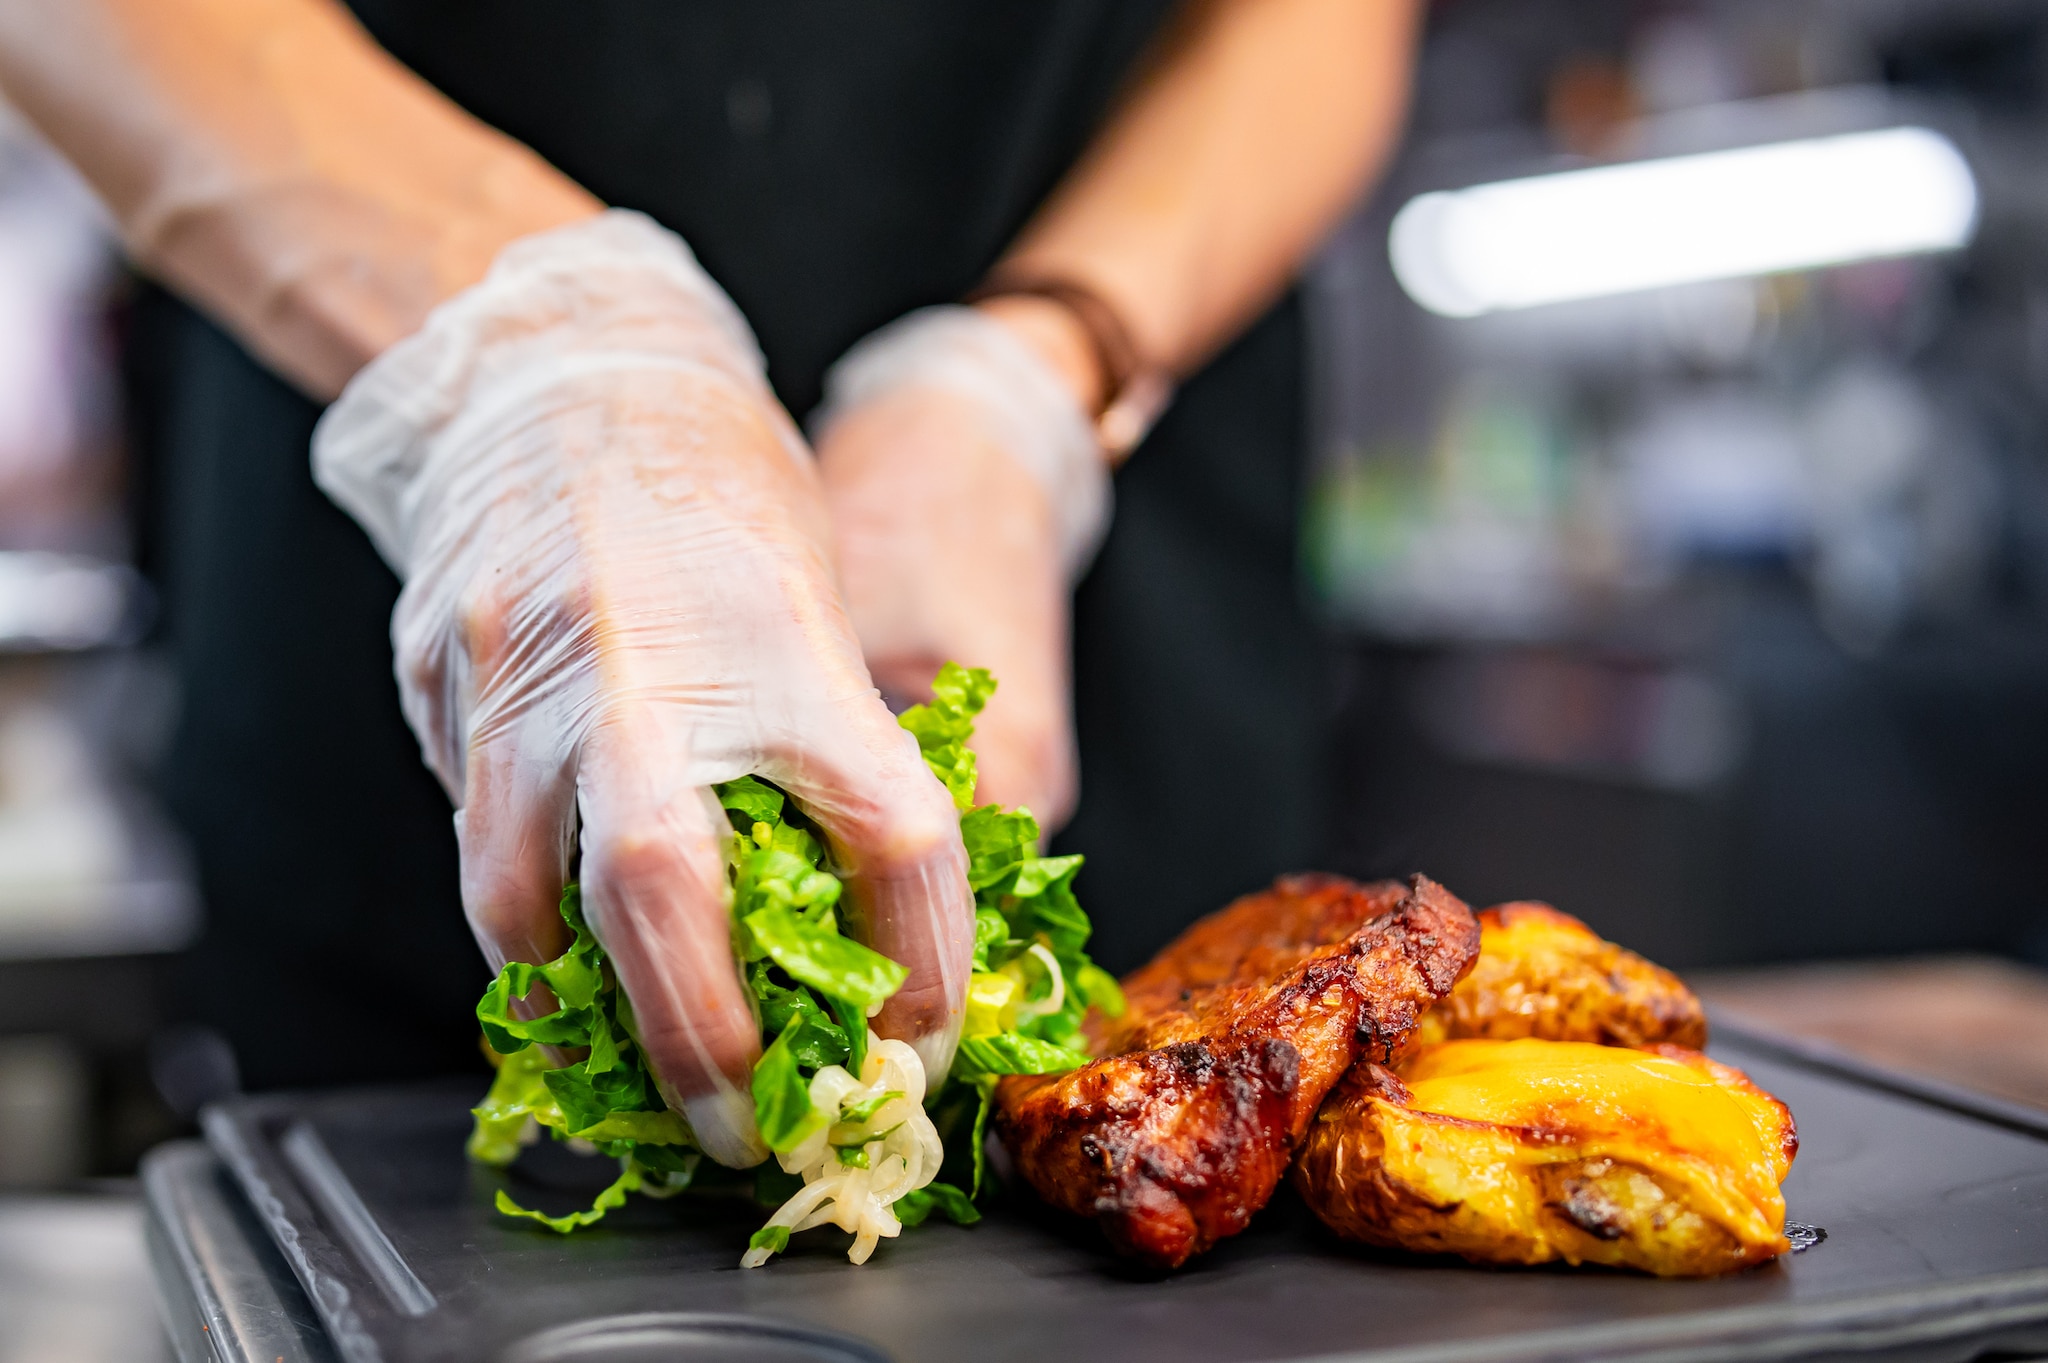 Restaurant chef with gloved hands placing salad and meat on plate.